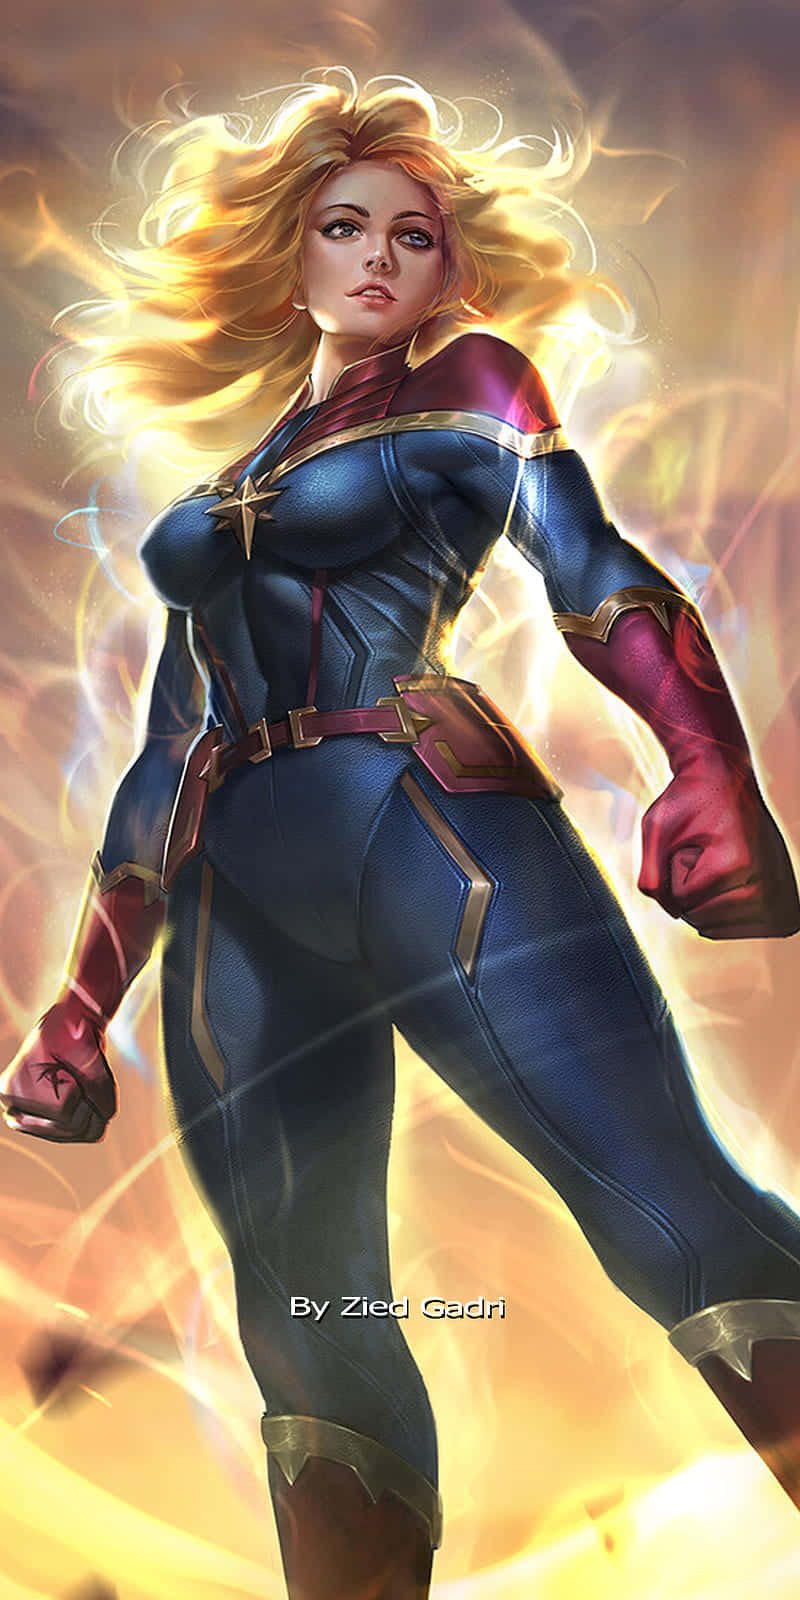 Marvel’s Heroine, Captain Marvel, comes to life on your iPad Wallpaper